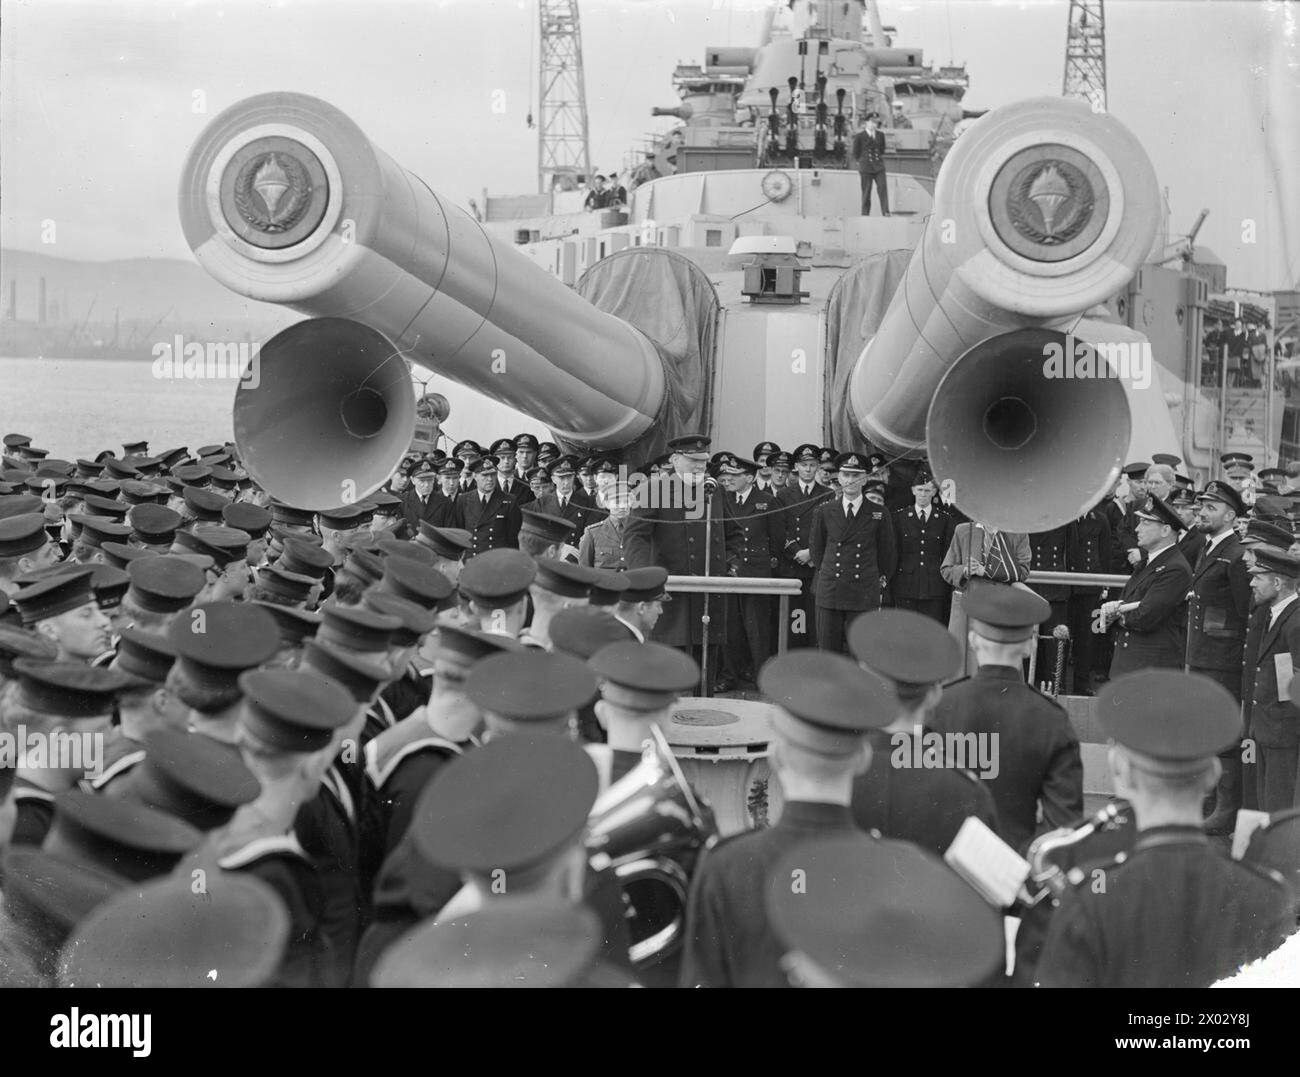 MR CHURCHILL'S RETURN. 20 SEPTEMBER 1943, GREENOCK. HMS RENOWN, THE 23,000 TON BATTLE-CRUISER BROUGHT MR CHURCHILL HOME AFTER HIS LONG STAY IN CANADA AND THE US. - Mr Churchill addressing the ship's company of HMS RENOWN before disembarking. Behind him is his daughter, Subaltern Mary Churchill Stock Photo